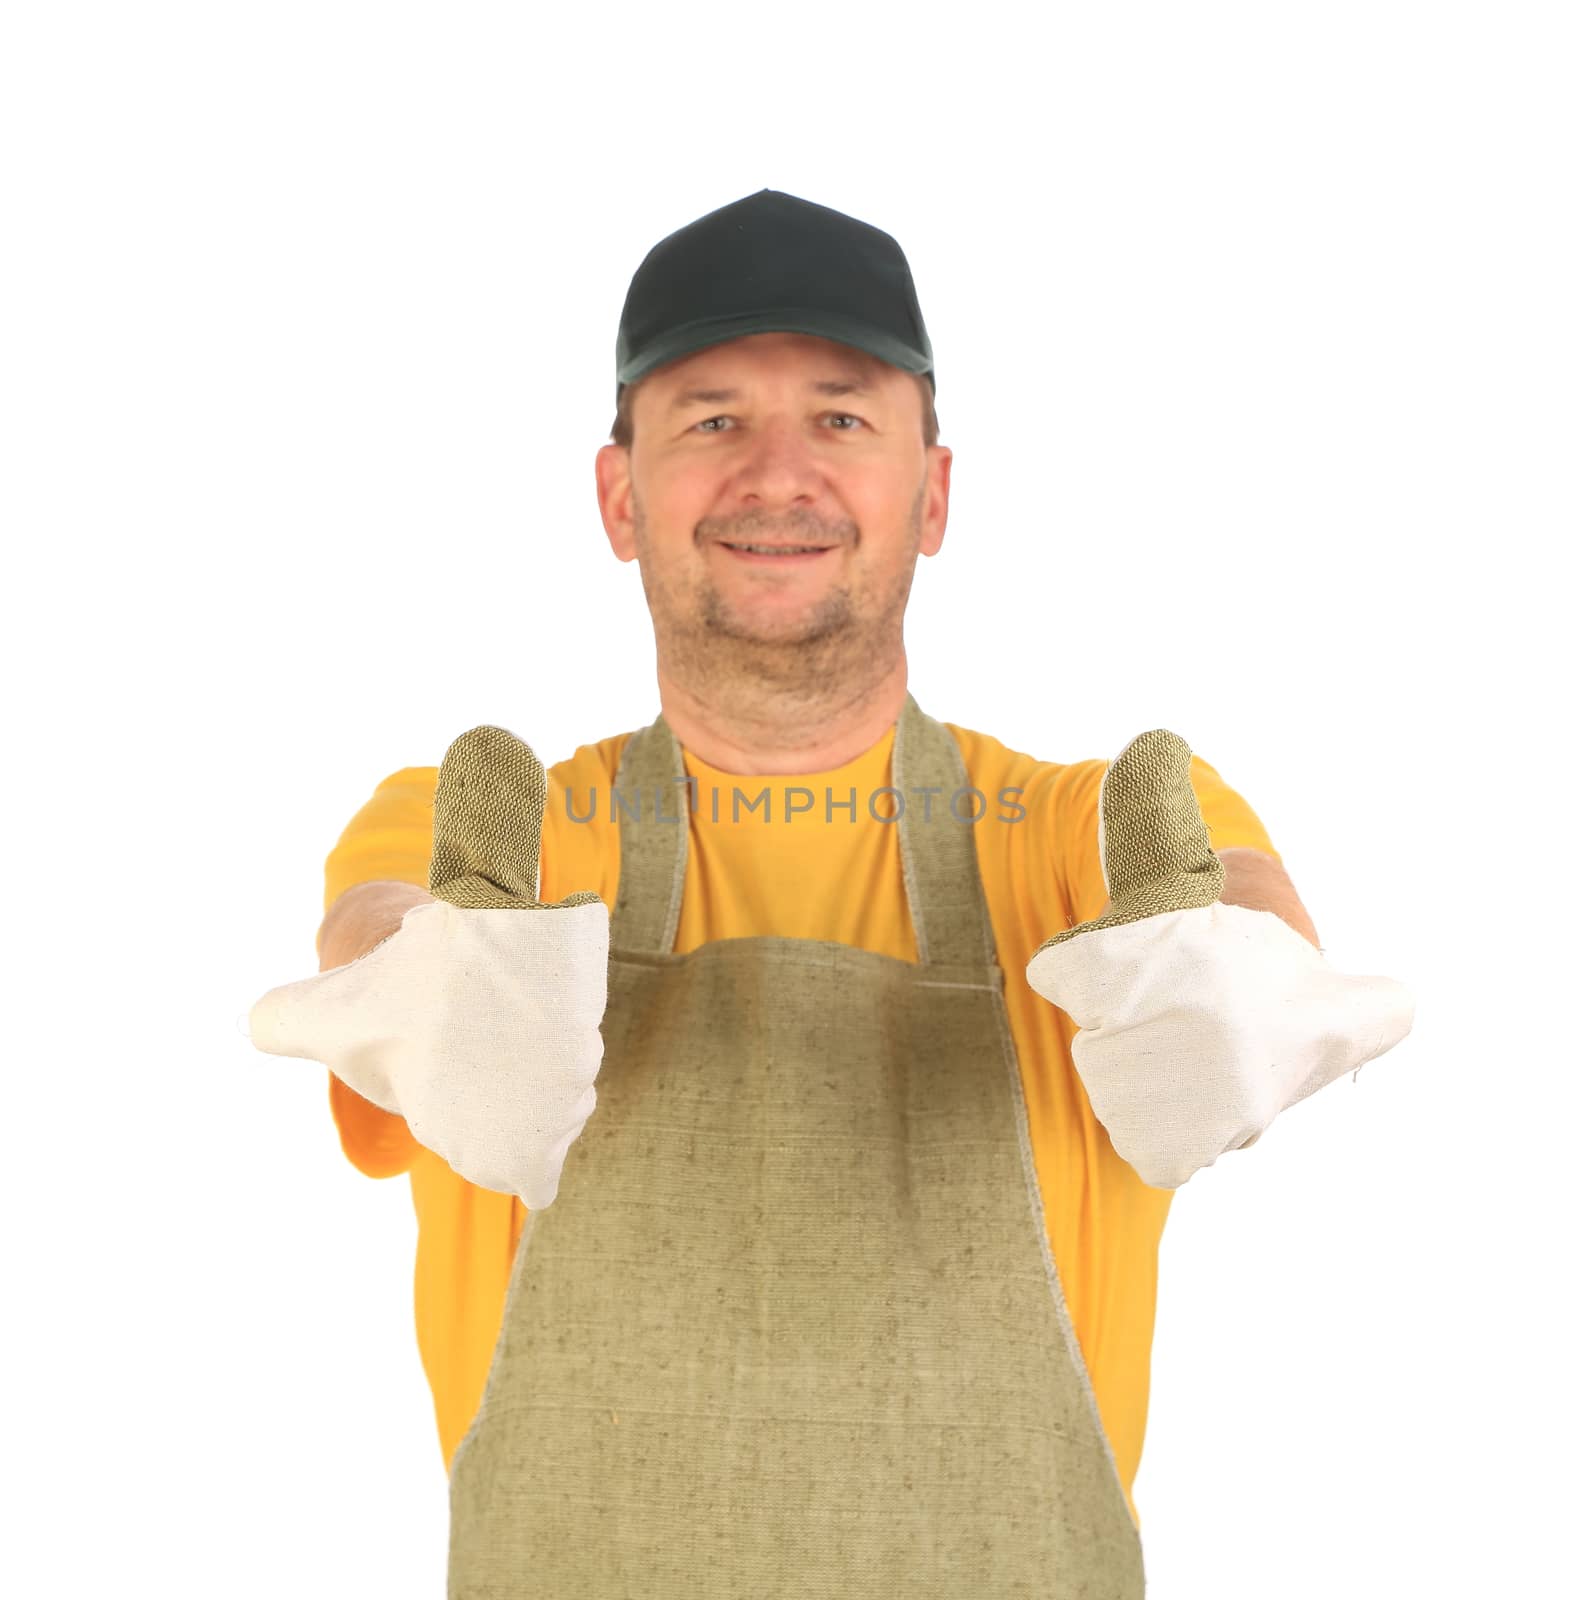 Apron man smiling with thumbs up. Isolated on a white background.